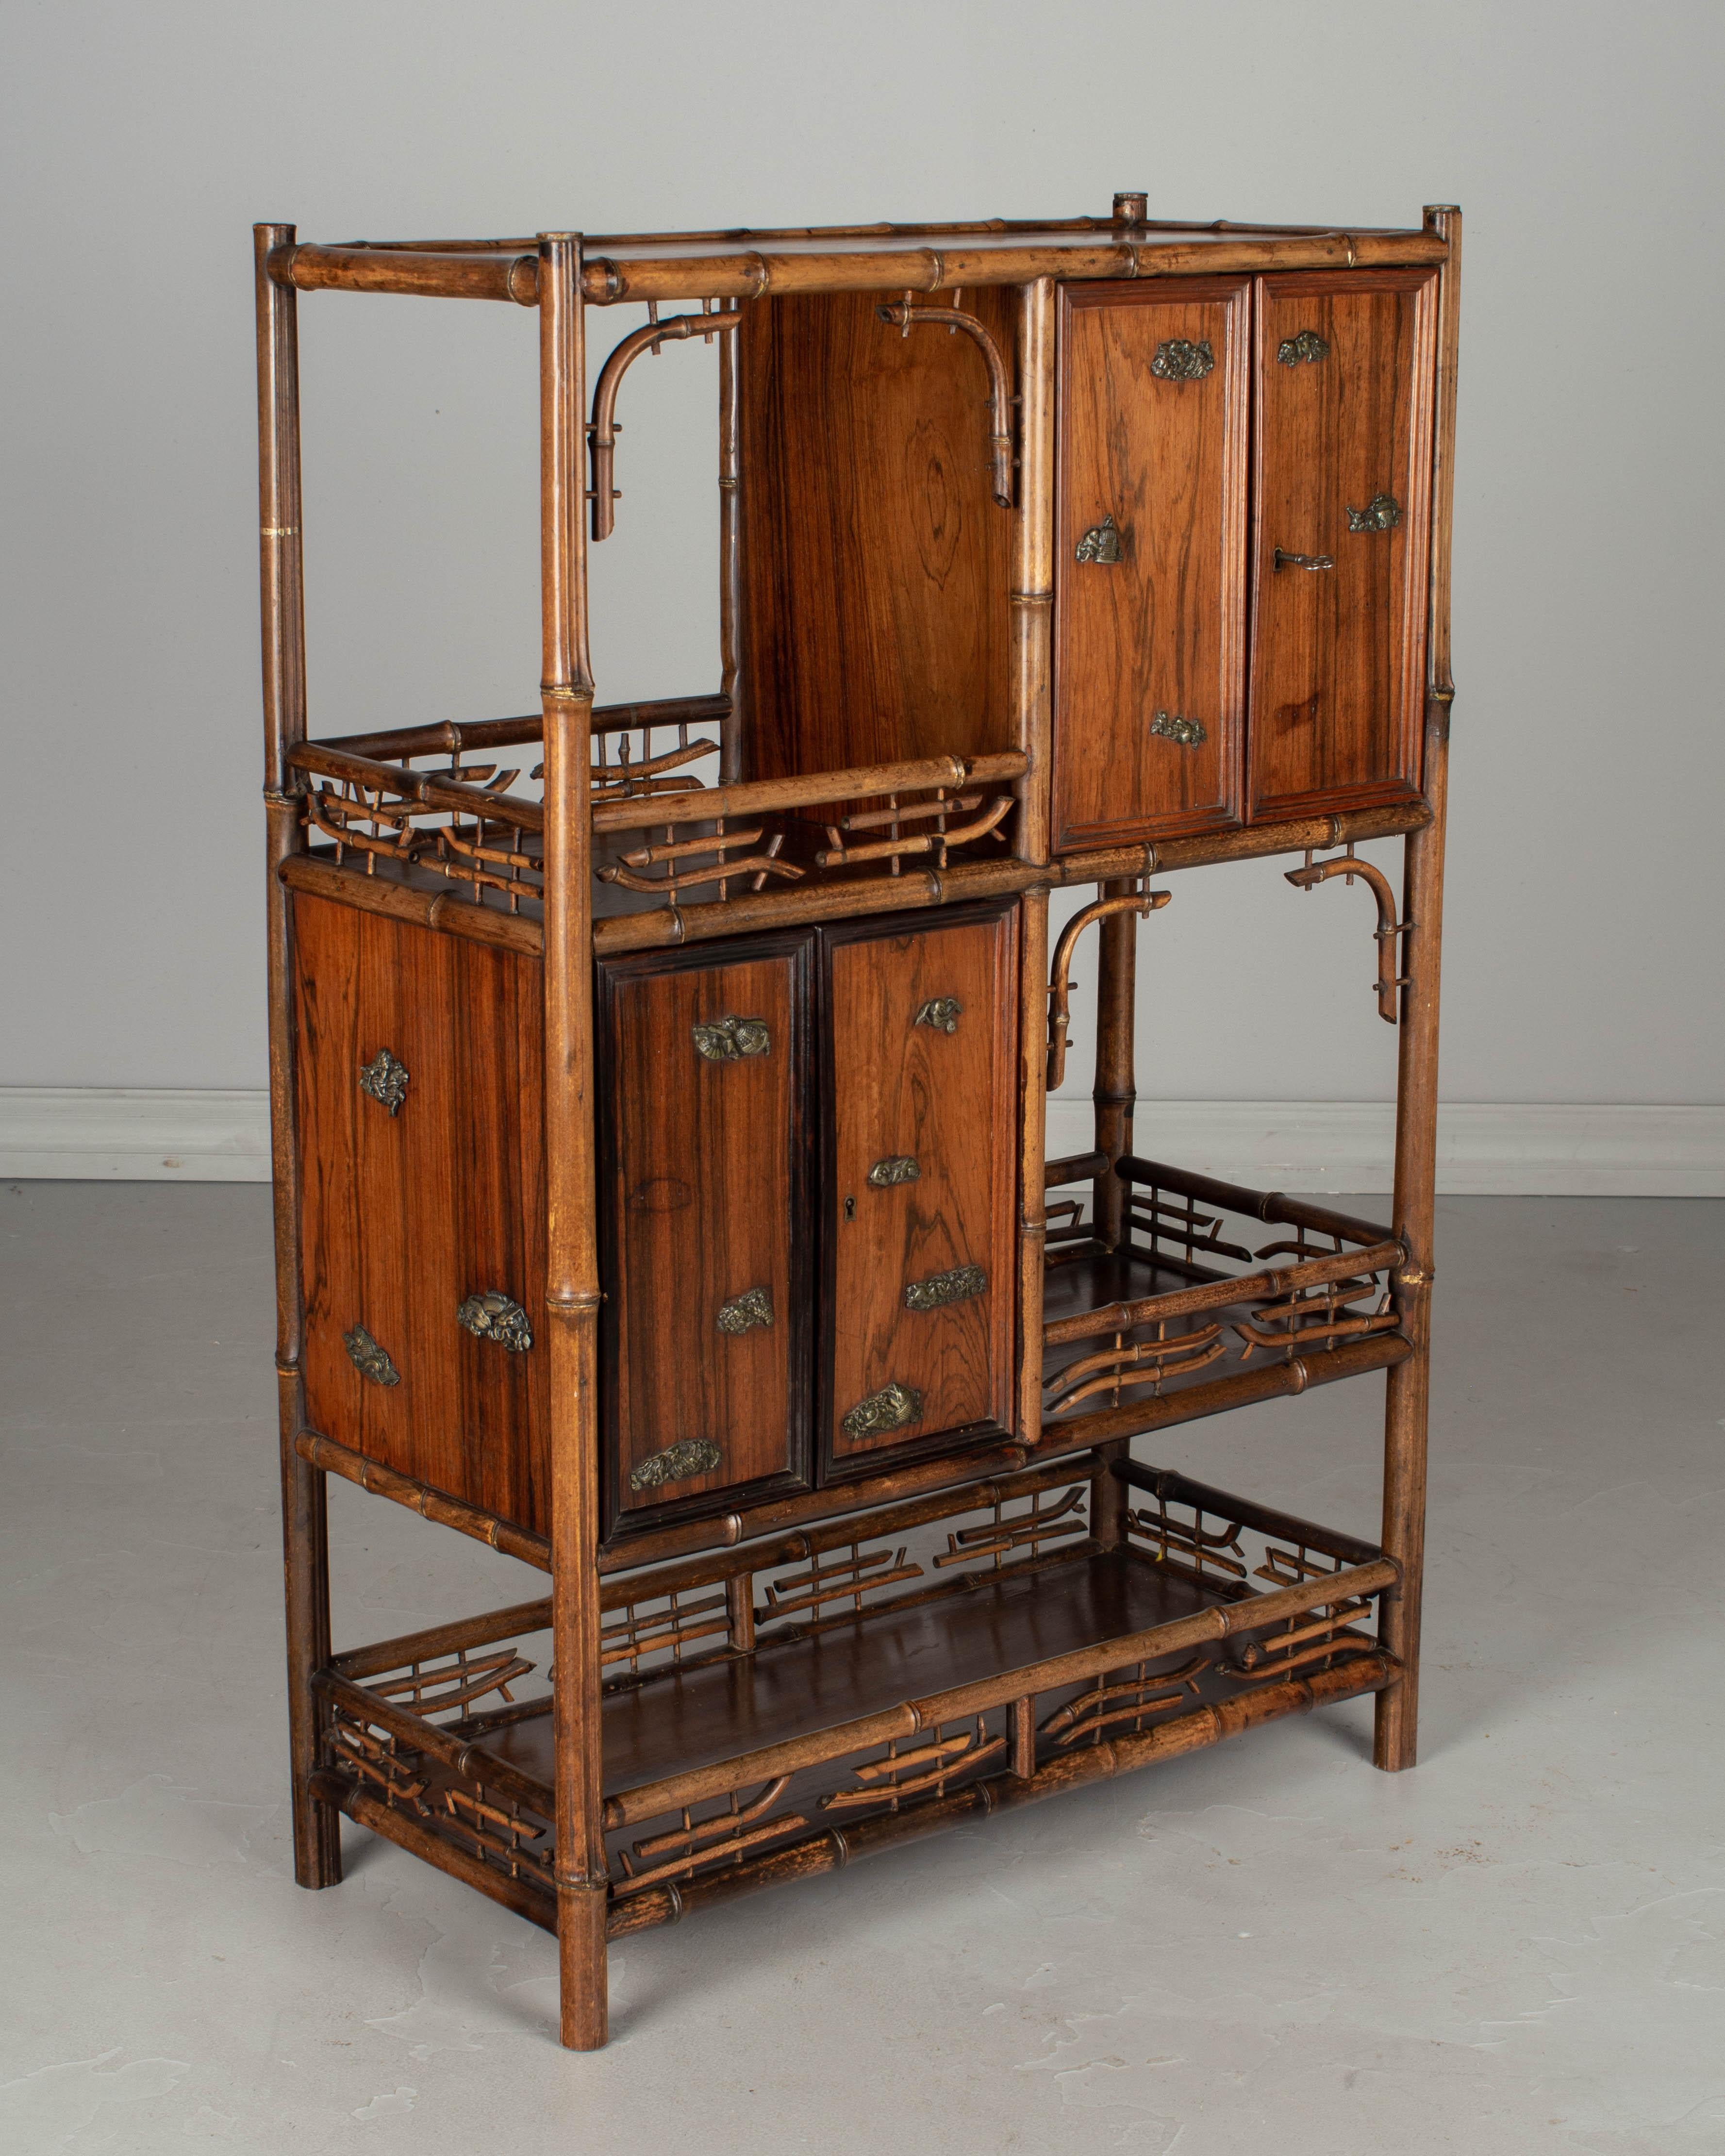 A 19th century English bamboo and rosewood Asian style étagère having open shelves with decorative bamboo galleries and two small cabinets. The cabinets are made of rosewood and have ornamental metal medallions on the doors and on the sides. Two are